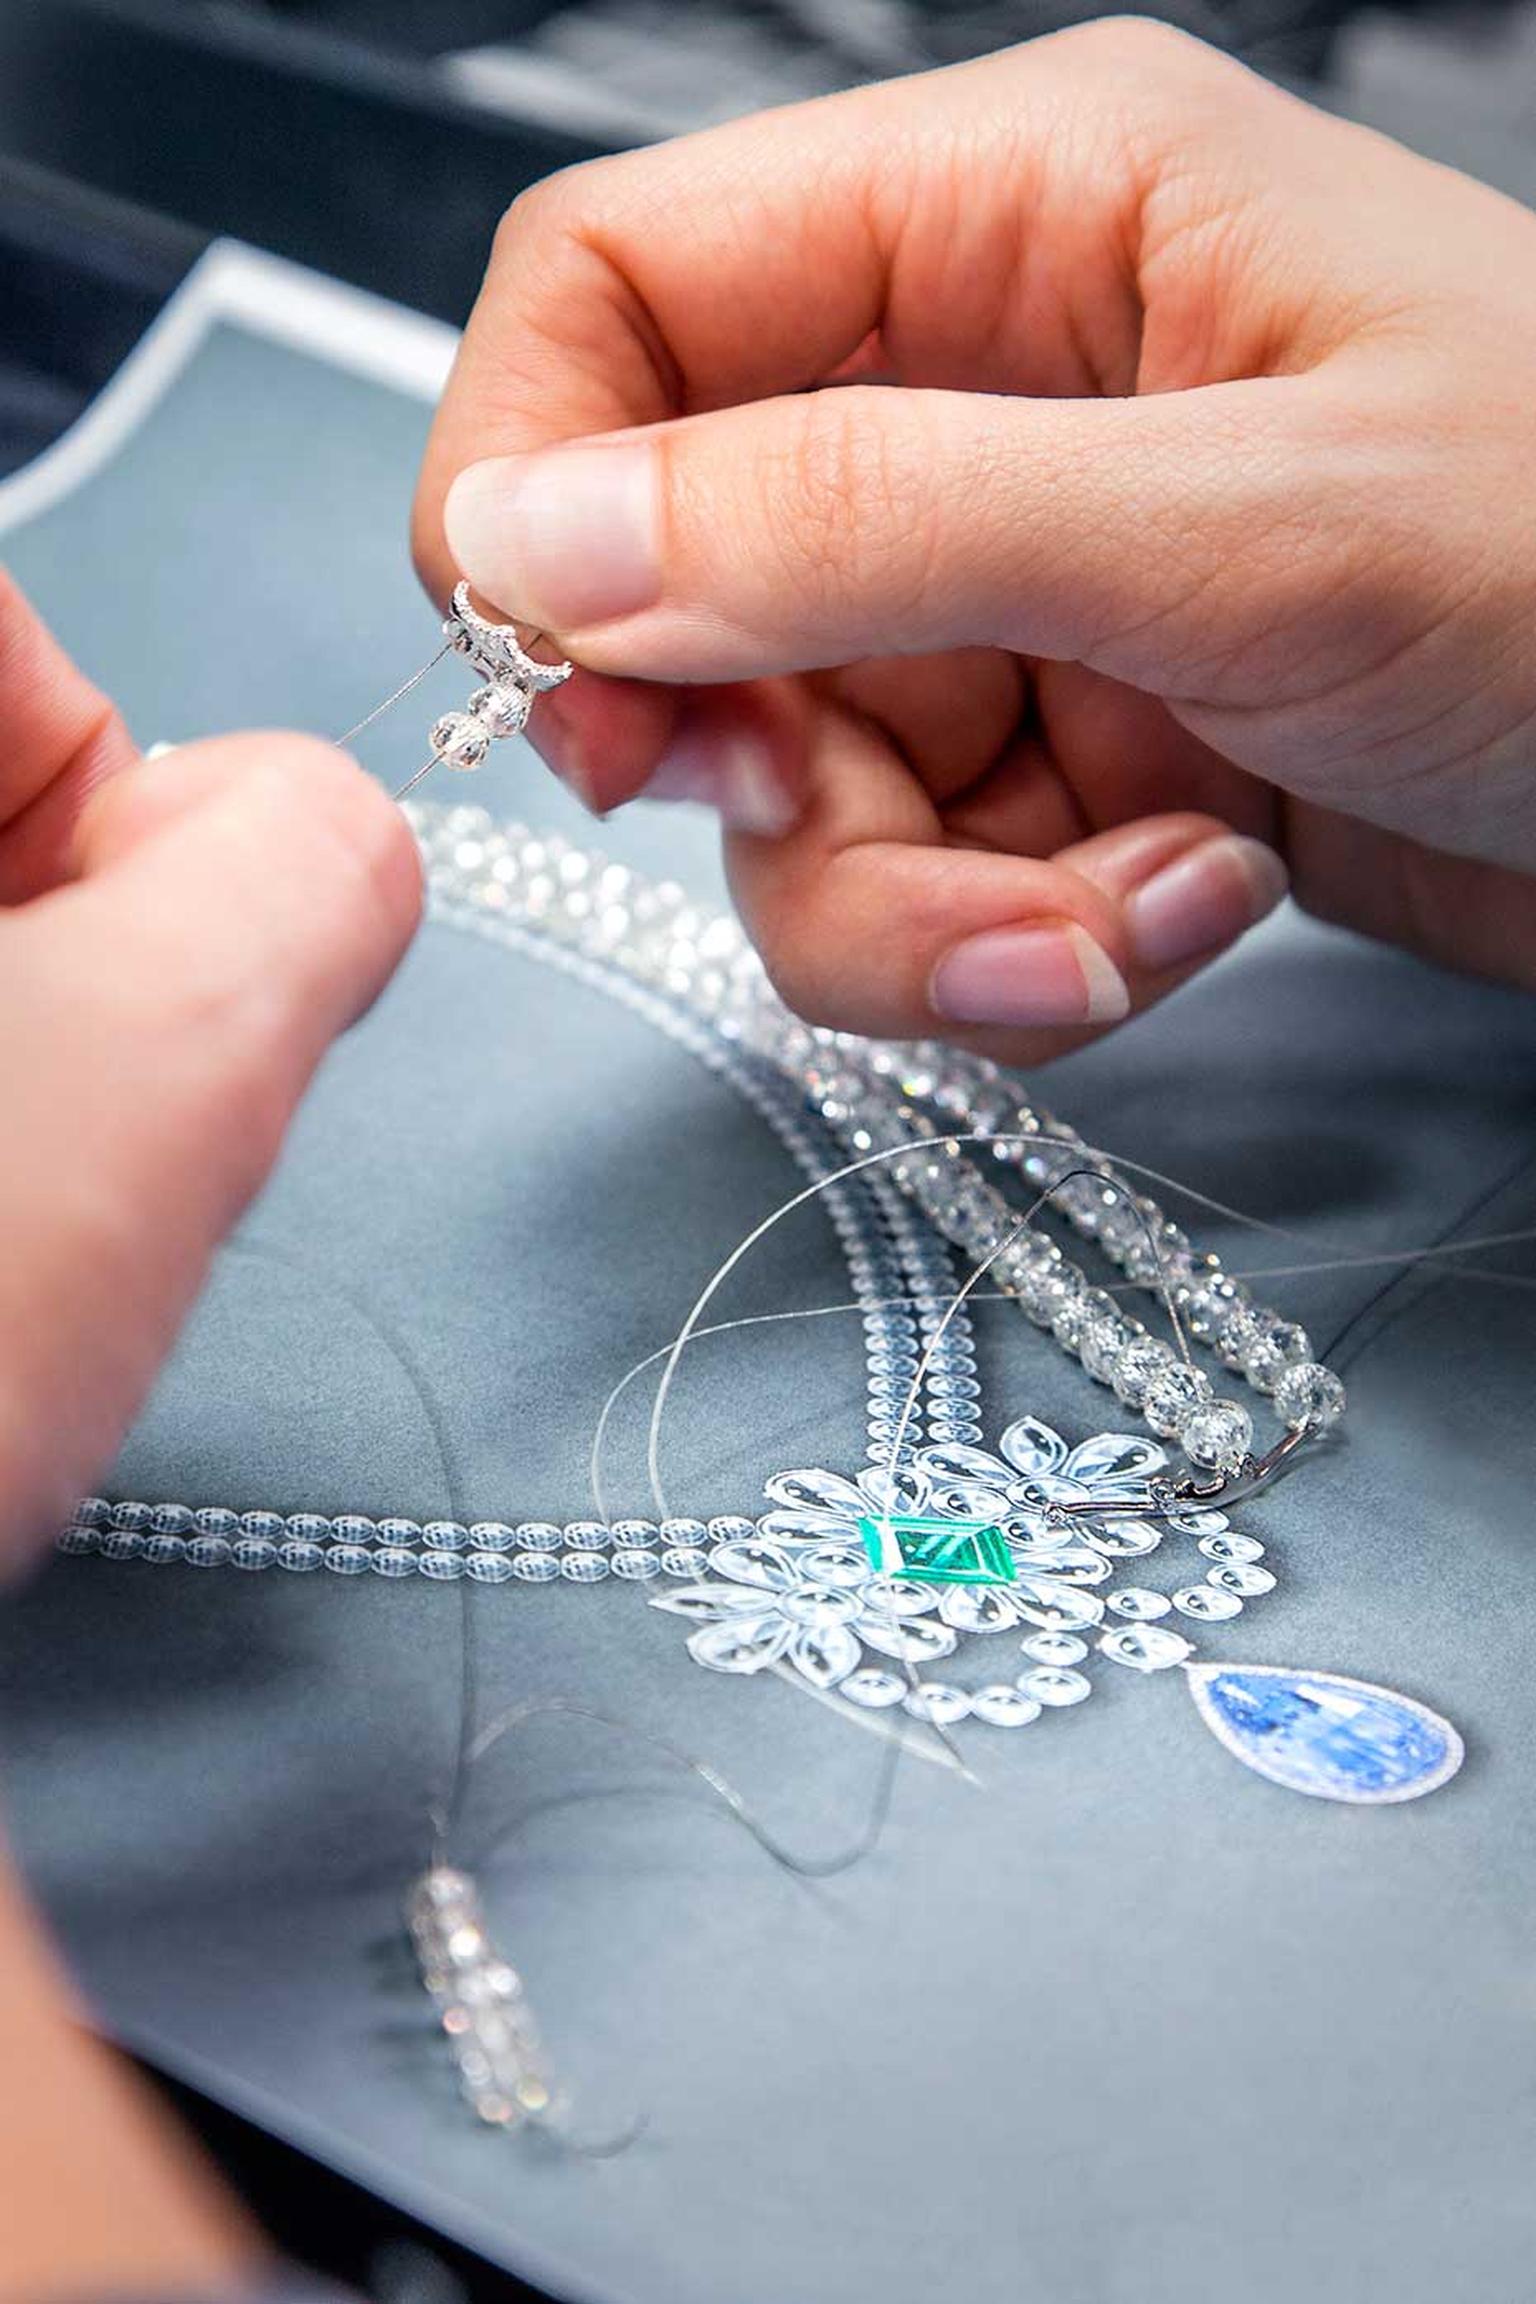 Faceted diamond beads are threaded to form the necklace of the Graff Le Collier Bleu de Reve, which will be on show for the first time at the 2014 Biennale de Paris this week.